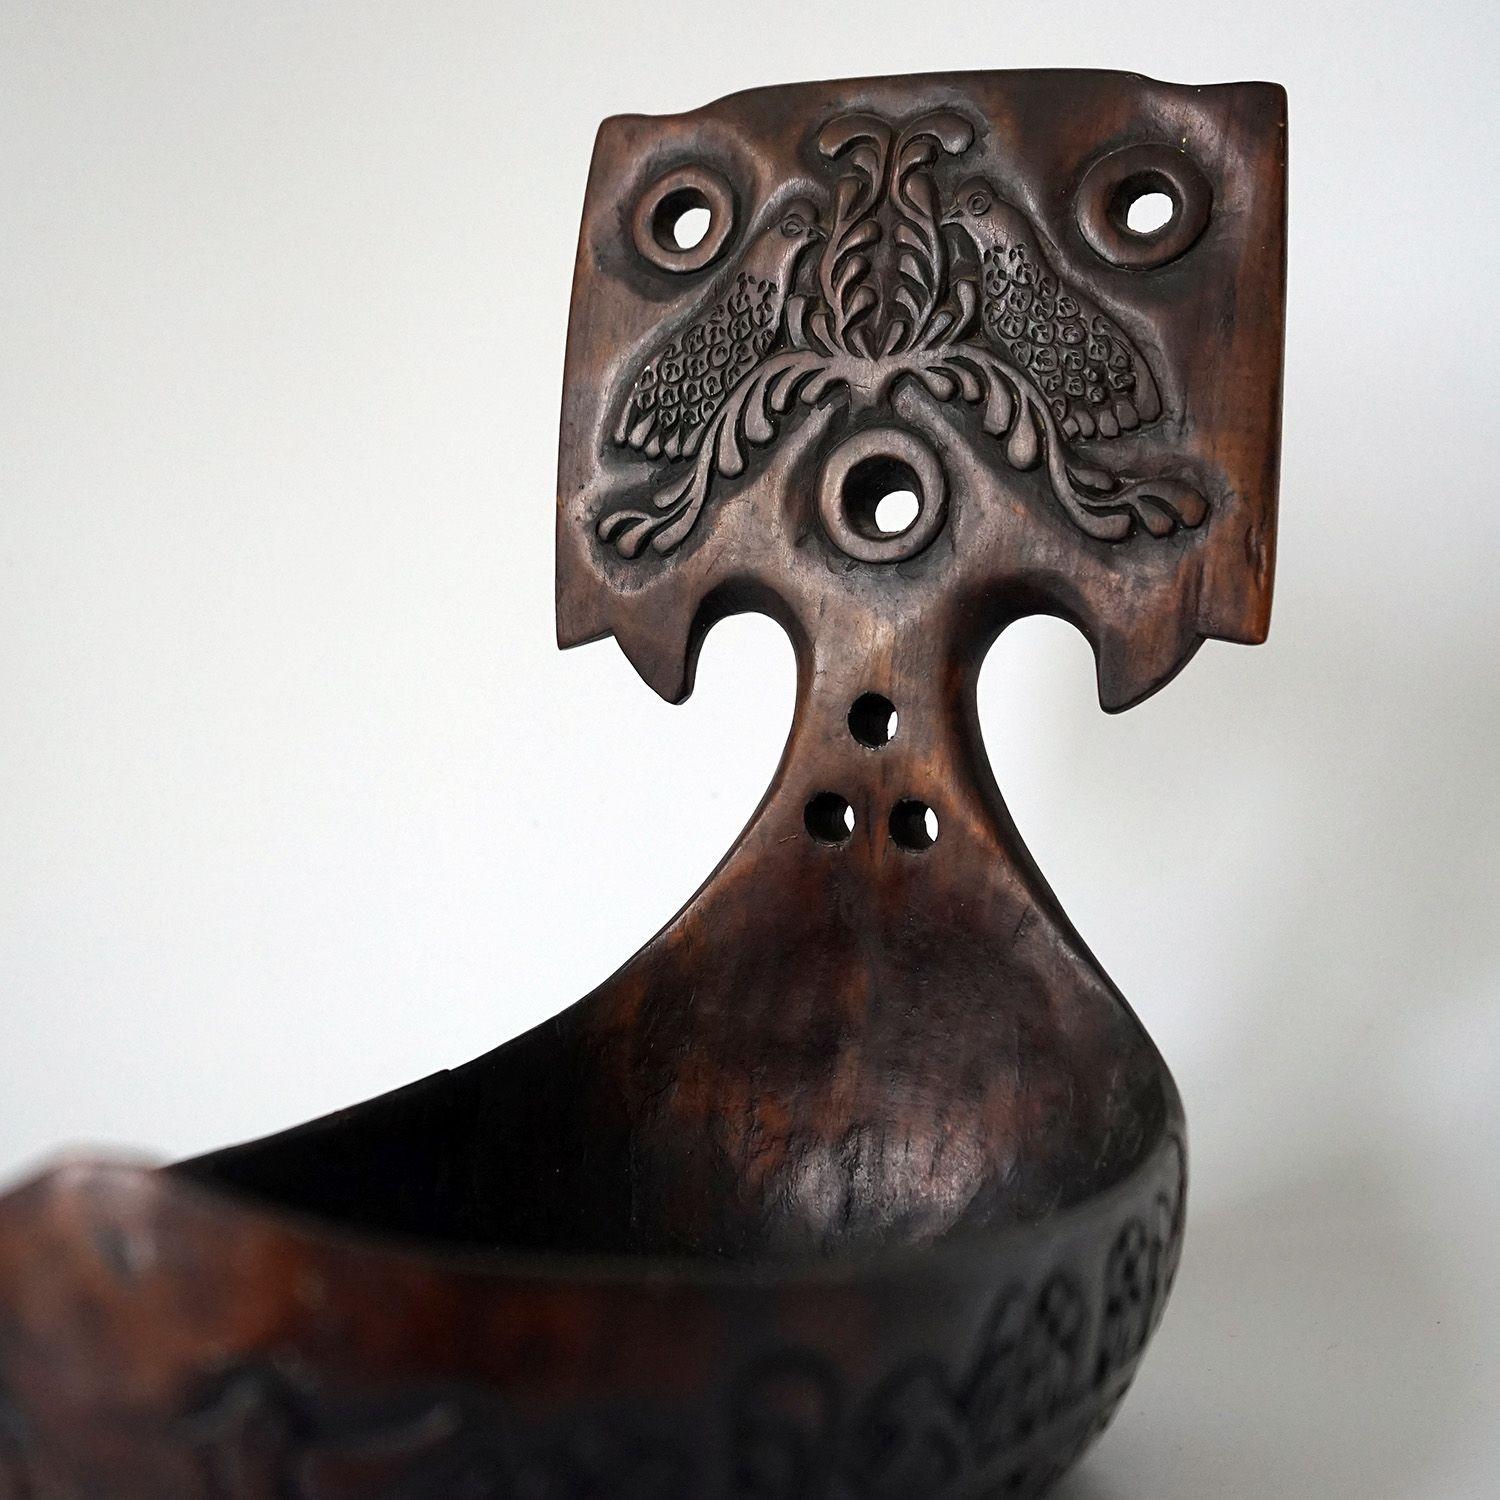 Antique Arts and Crafts carved wooden drinking vessel

A carved Russian Kovsh, a boat-shaped drinking vessel originally intended for mead.

Unsigned but we have identified an almost identical example which Sotheby’s identified as by the Abramtsevo